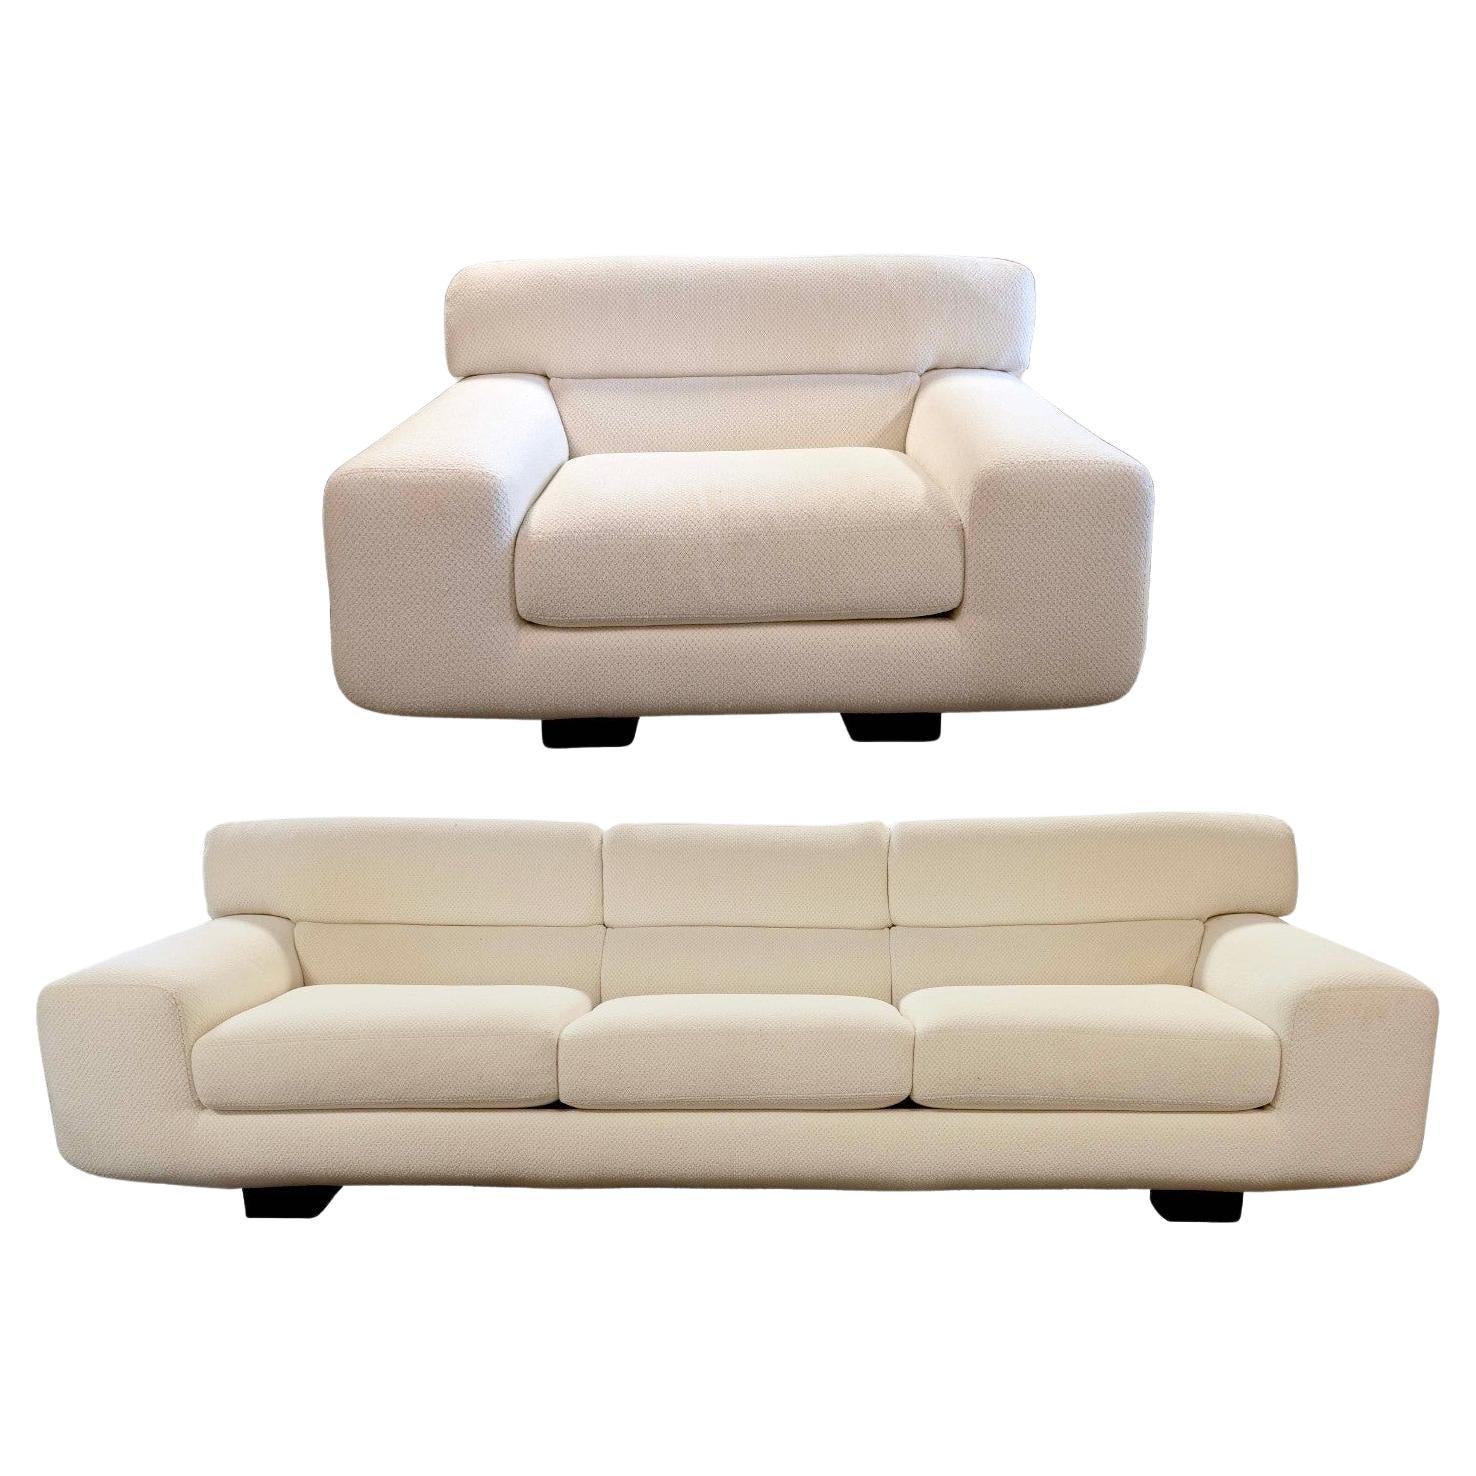 Contemporary Modern White Preview Furniture Corporation Sofa und Lounge Chair